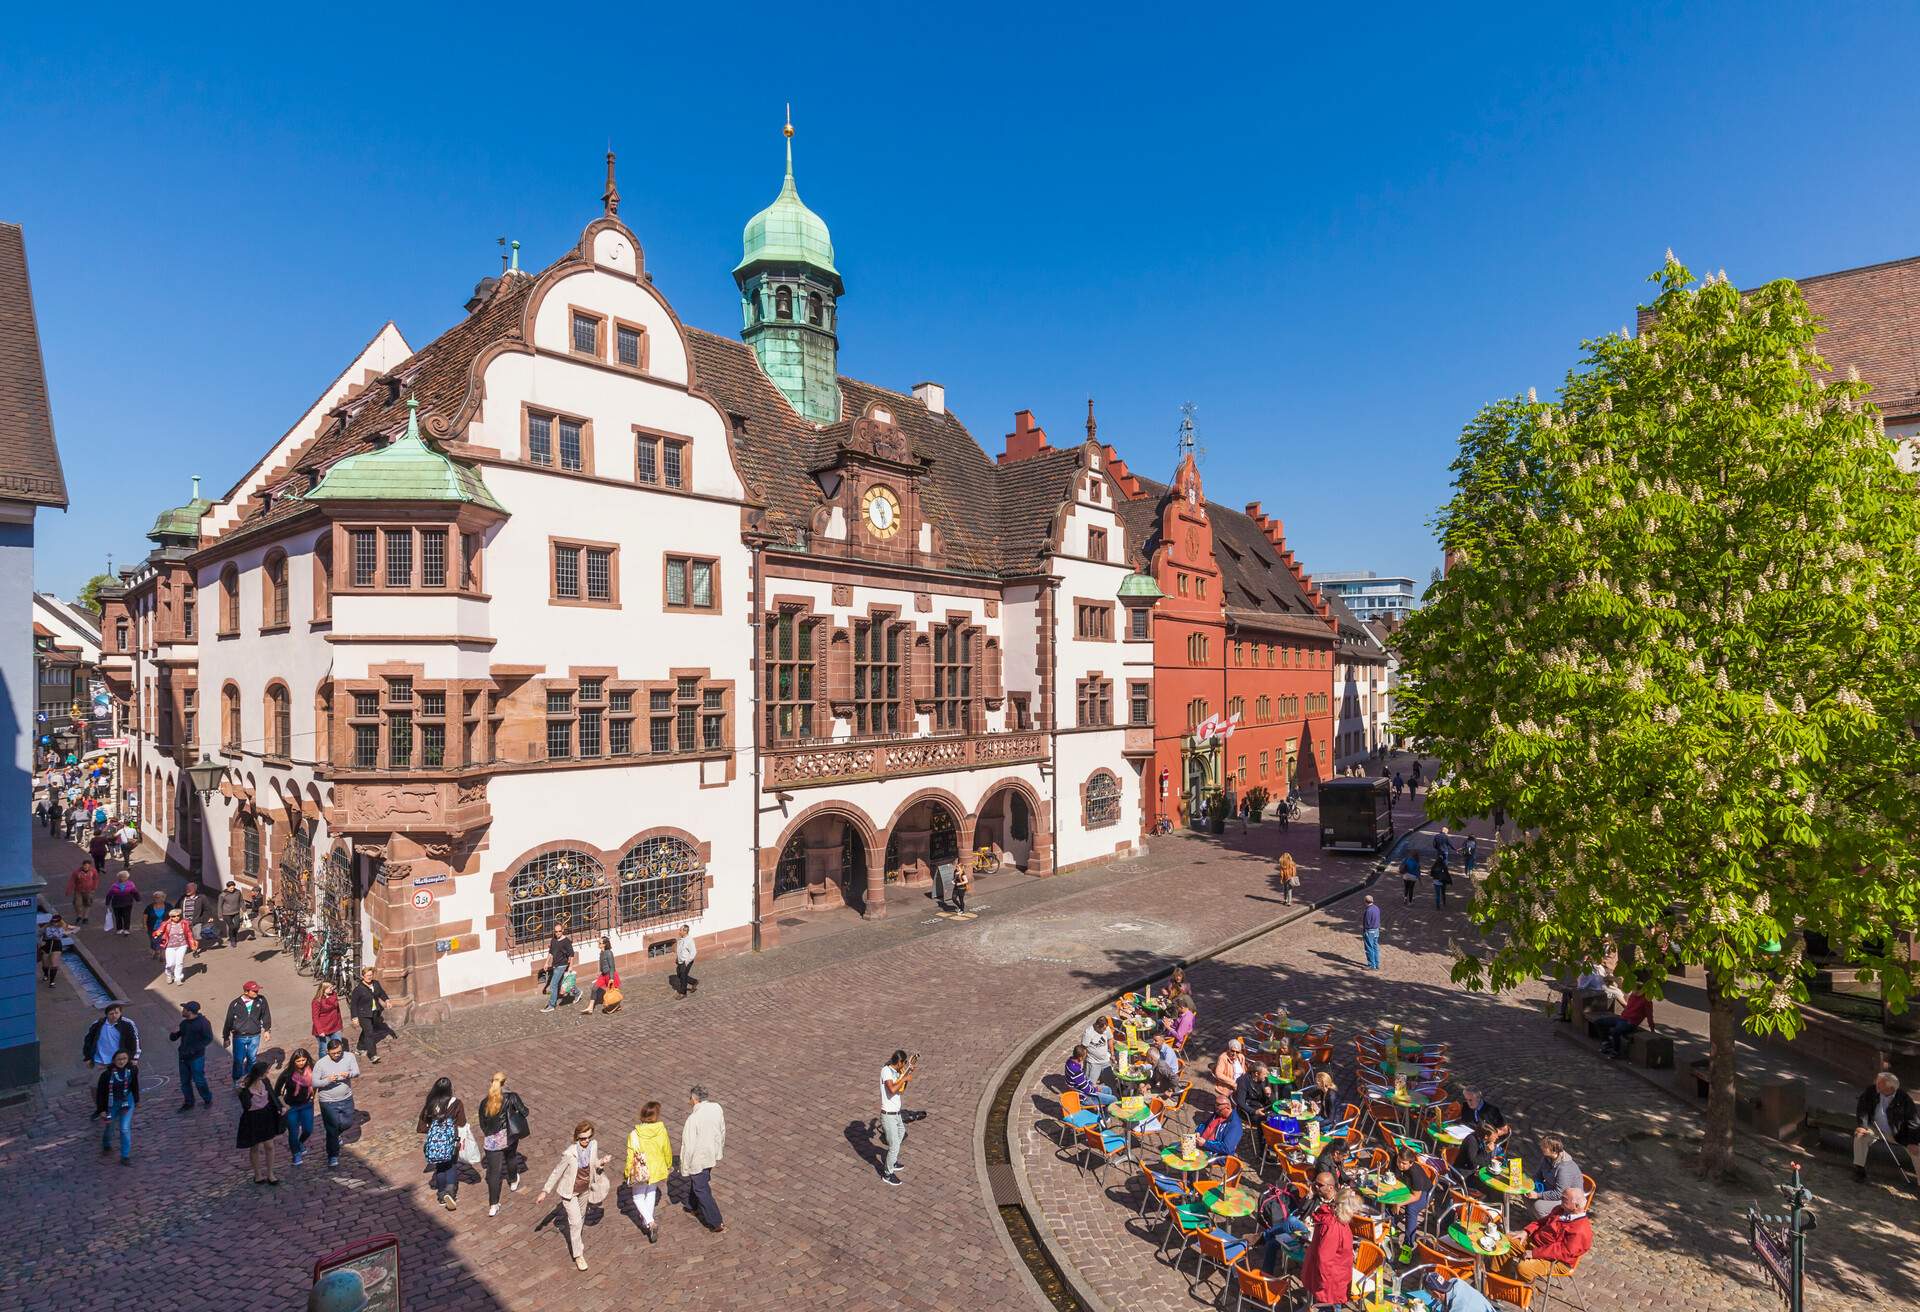 DEST_GERMANY_BADEN-WUERTTEMBERG_FREIBURG_NEW-CITY-HALL_GettyImages-564951443